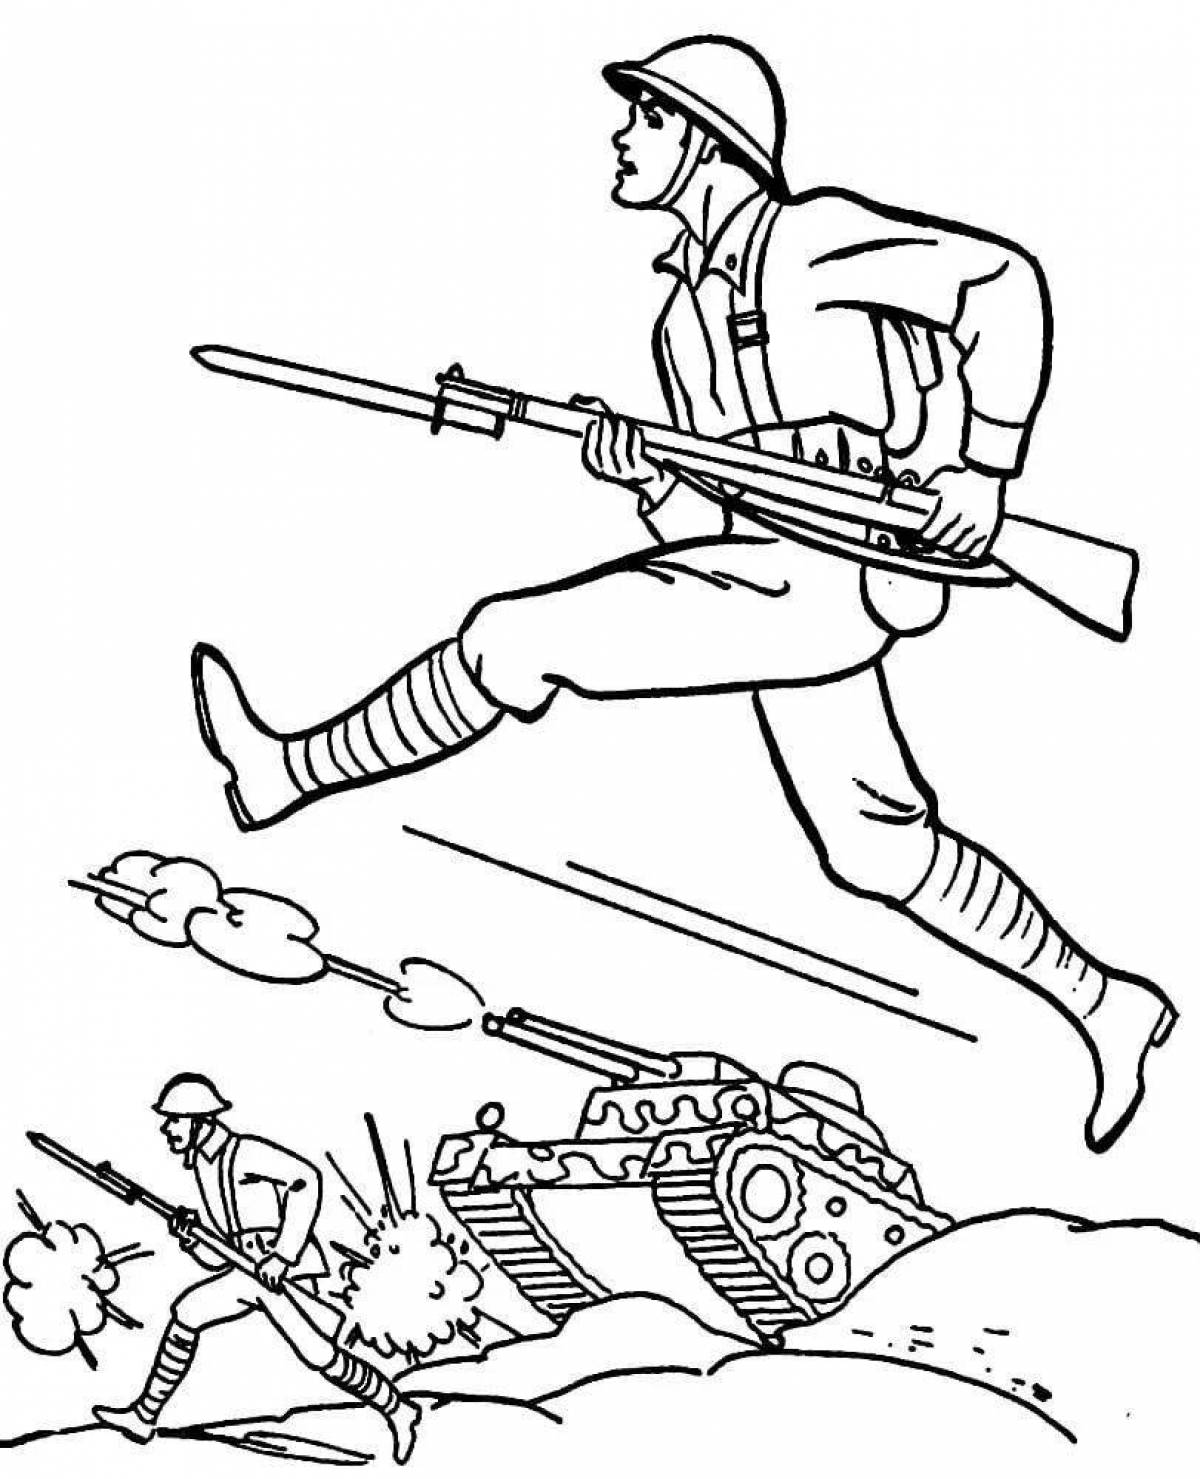 Brilliant soldier coloring page 23 February